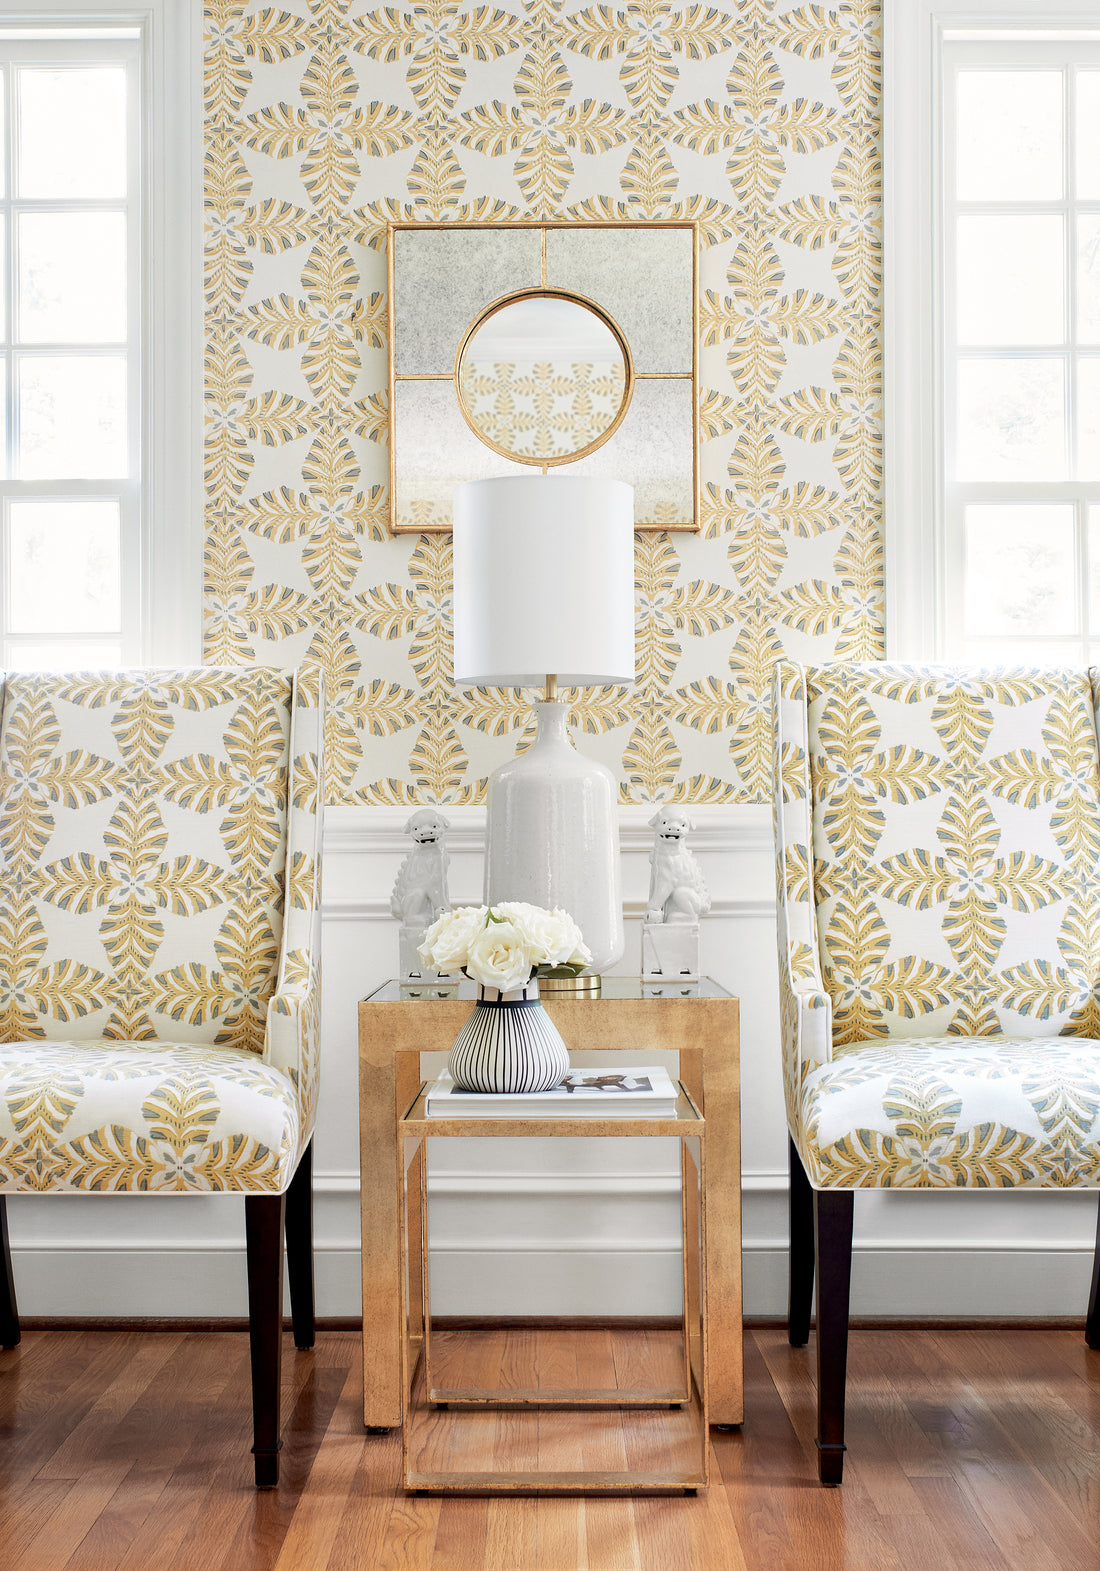 Hudson Dining Chair in Starleaf printed fabric in yellow color - pattern number F92970 by Thibaut in the Paramount collection